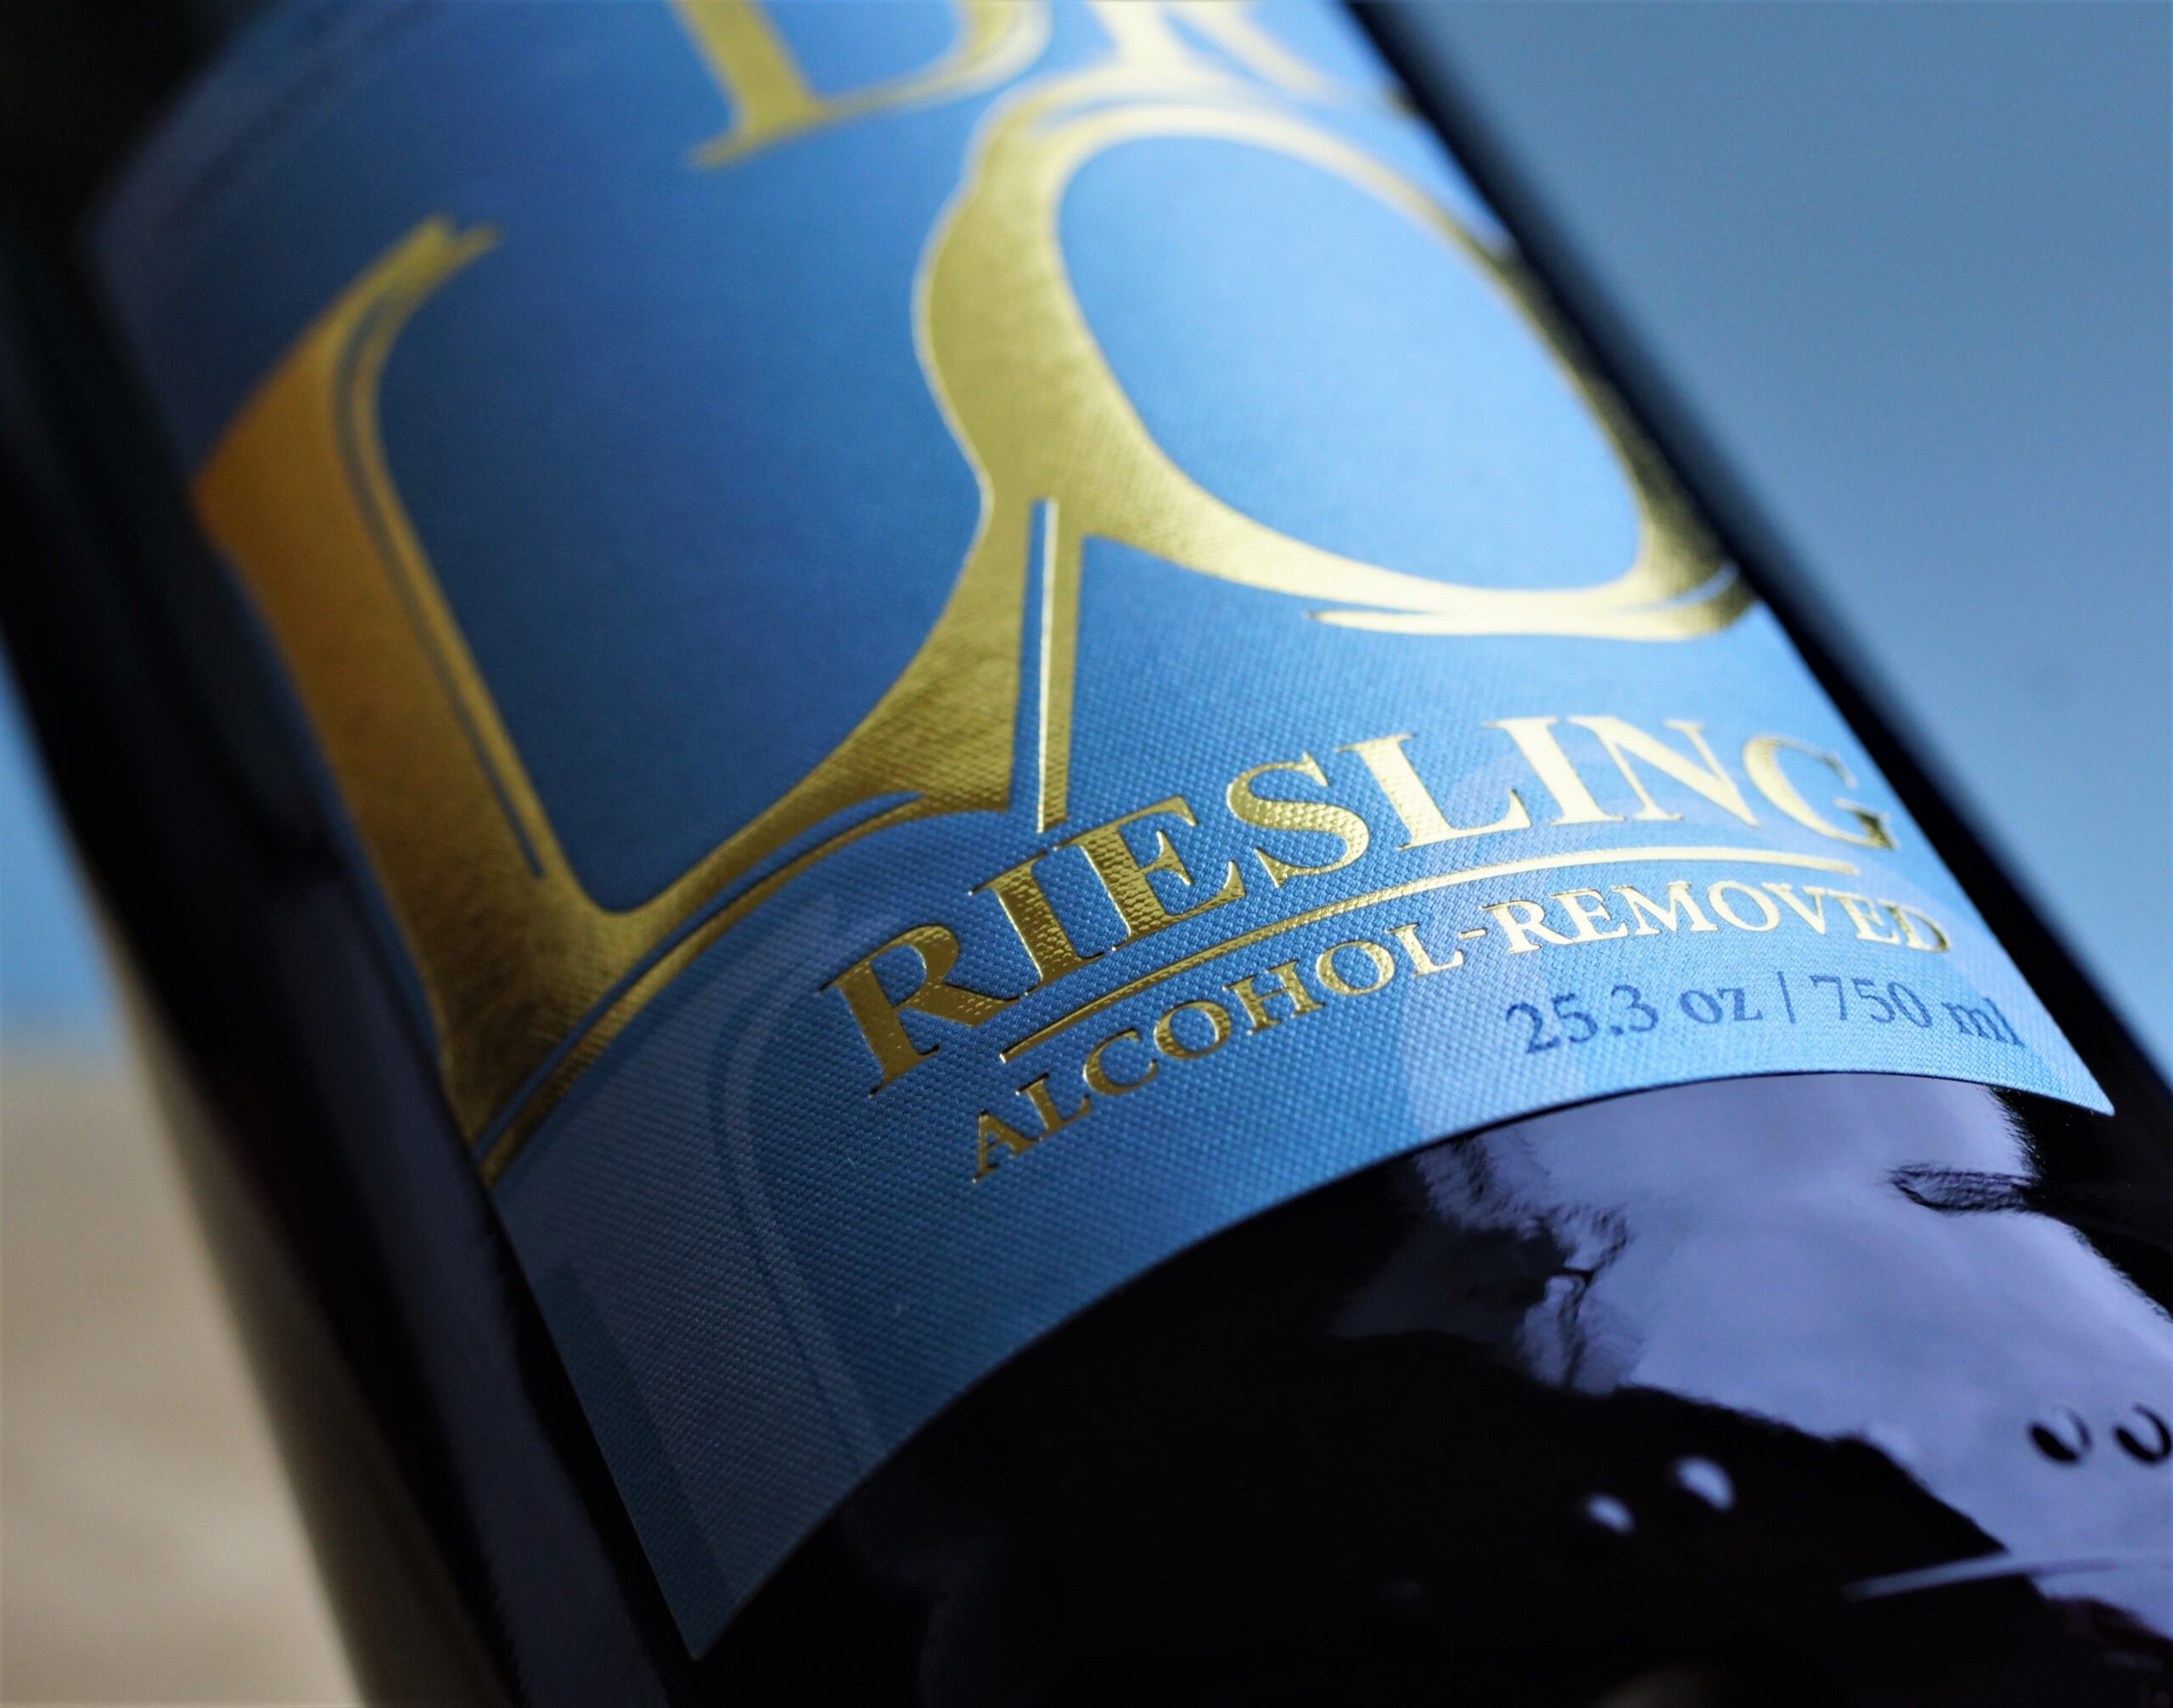 Loosen Bros. Enters Non-Alcoholic Wine Space with a New Line of Alcohol-Removed Rieslings